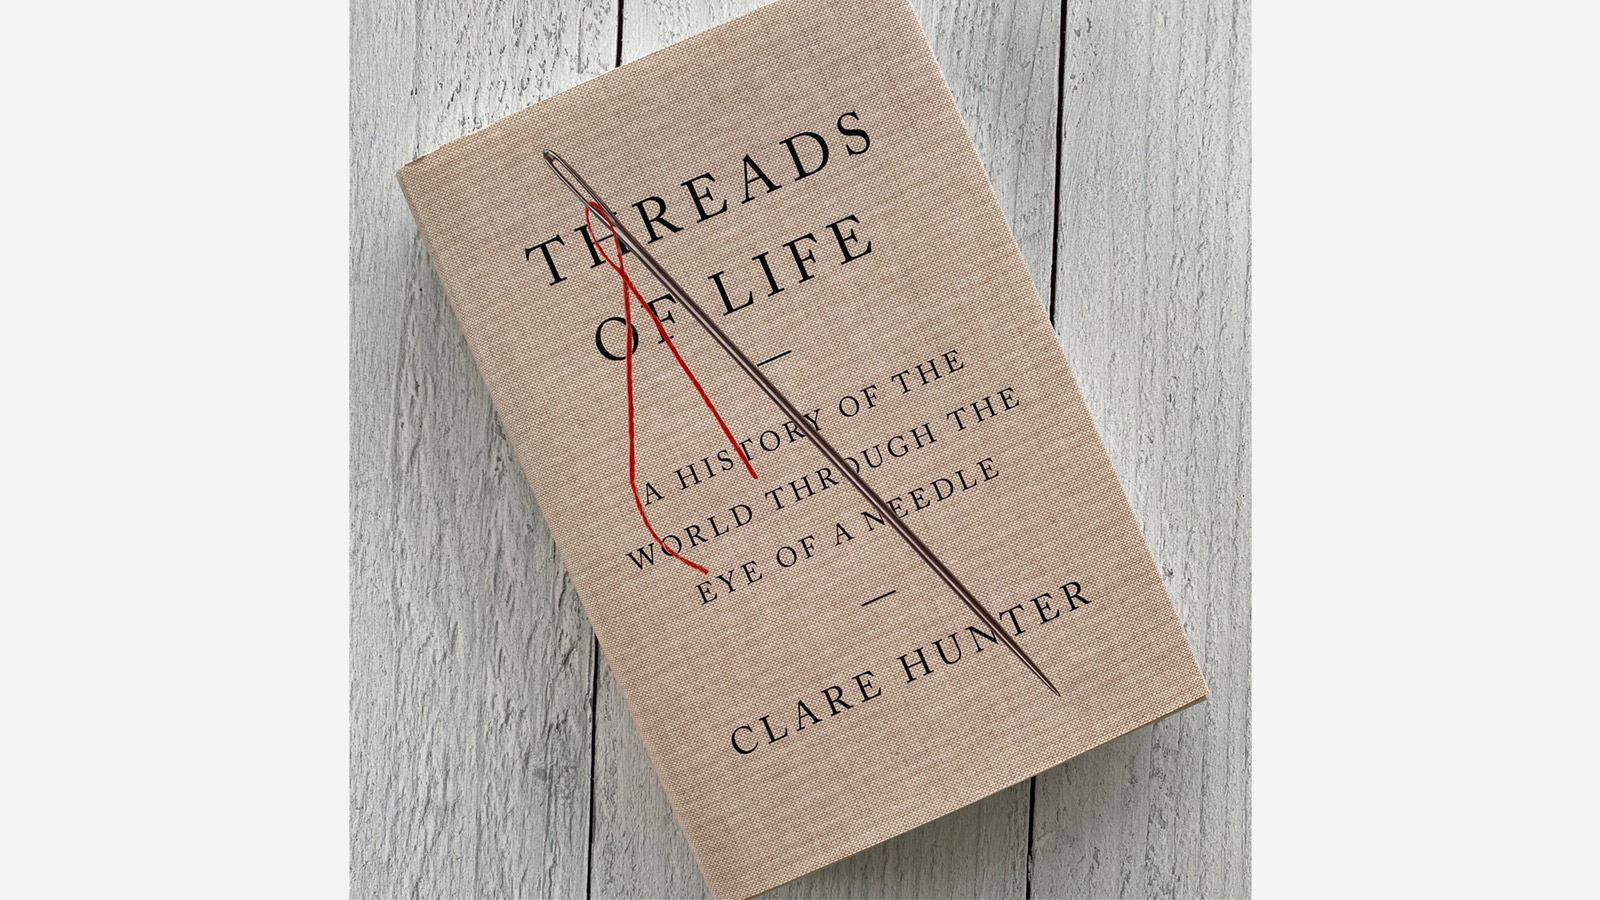 Threads of Life by Clare Hunter